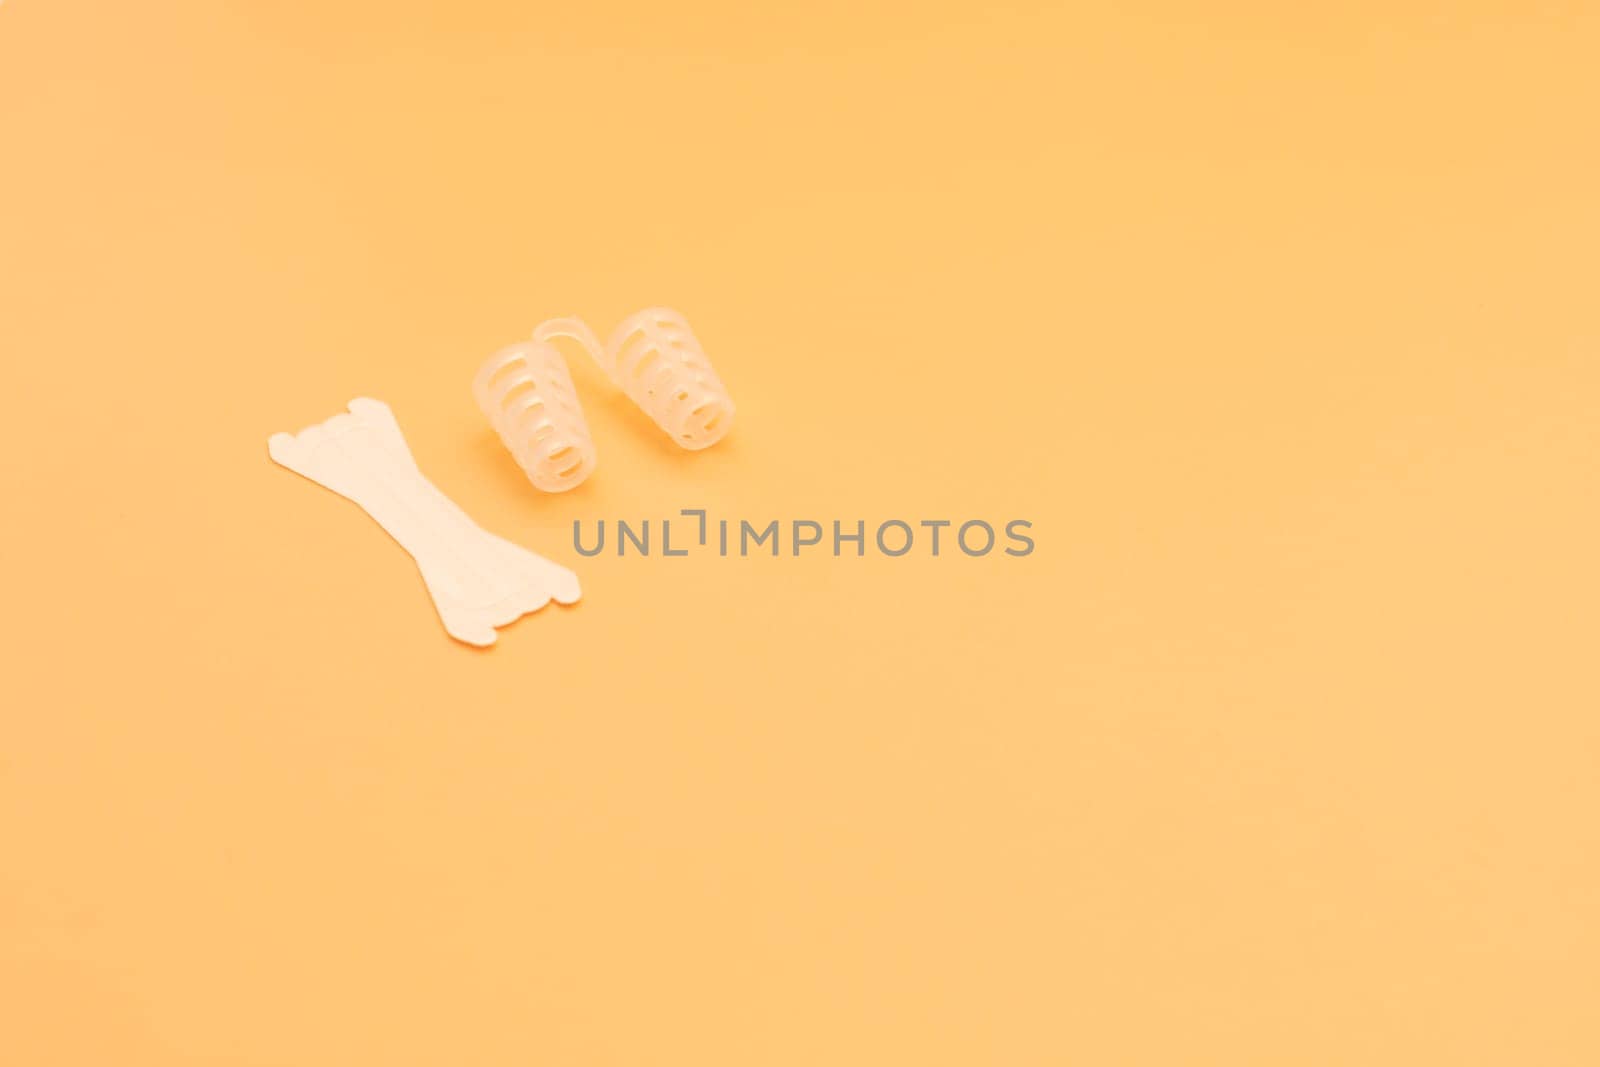 Mockup Anti Snoring Device. Nose Relief Nasal Dilator and White Nasal Strip on Peach Yellow Background, Sleeping Apnea Solution for Nasal Breathers, Snoring Problem. Space For Text Horizontal Plane. by netatsi